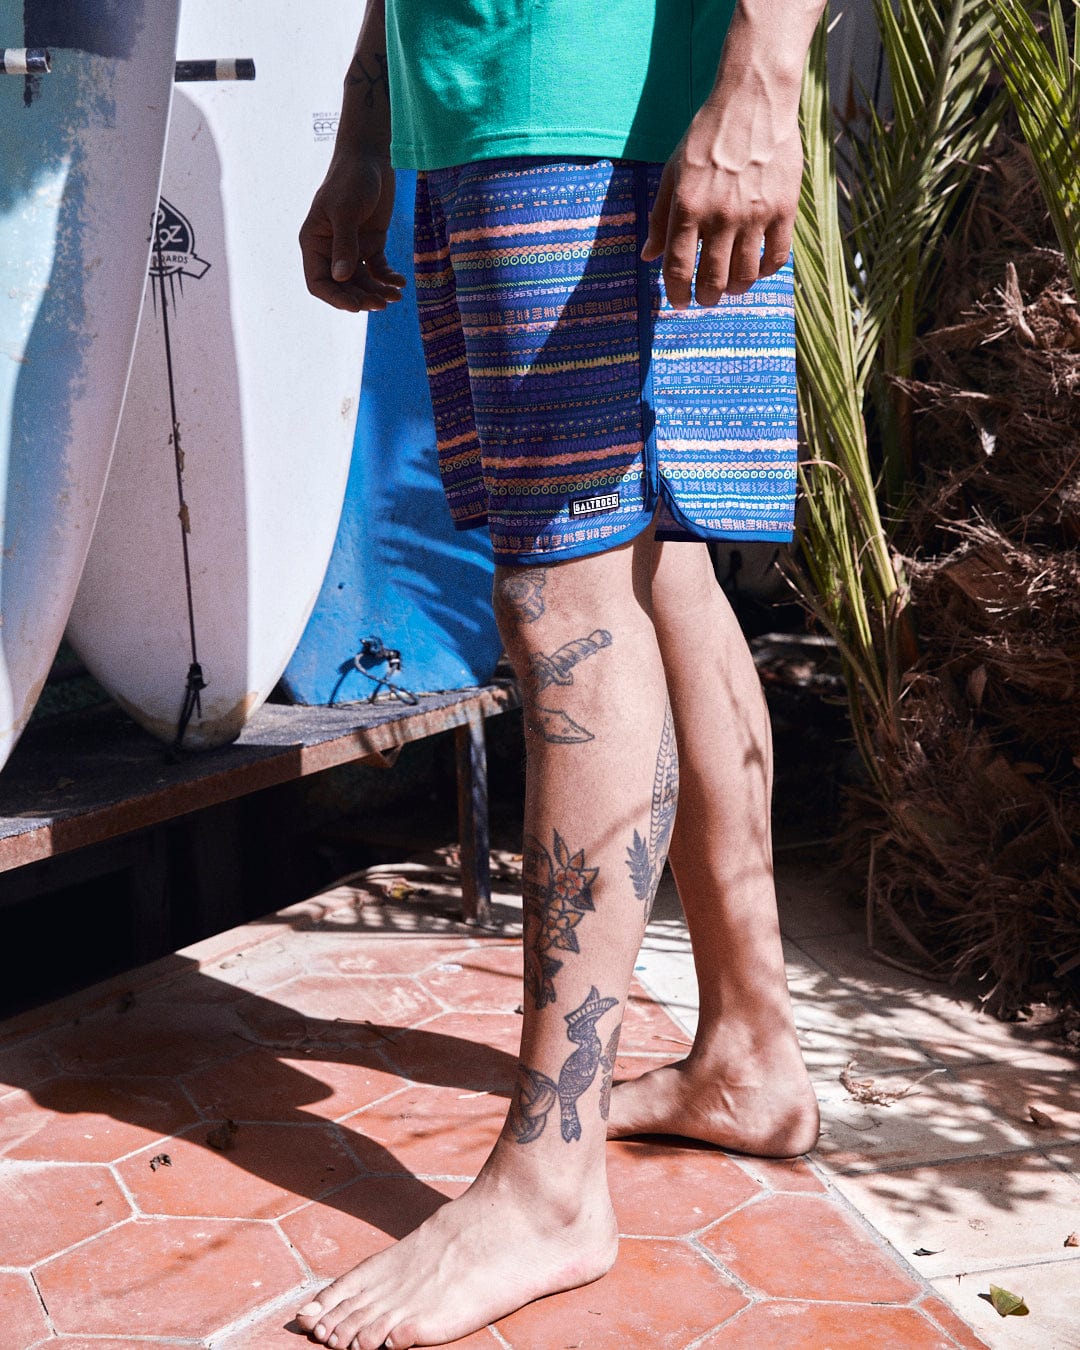 A person standing next to Saltrock surfboards, wearing blue Aztec print Silas boardshorts and displaying visible leg tattoos.